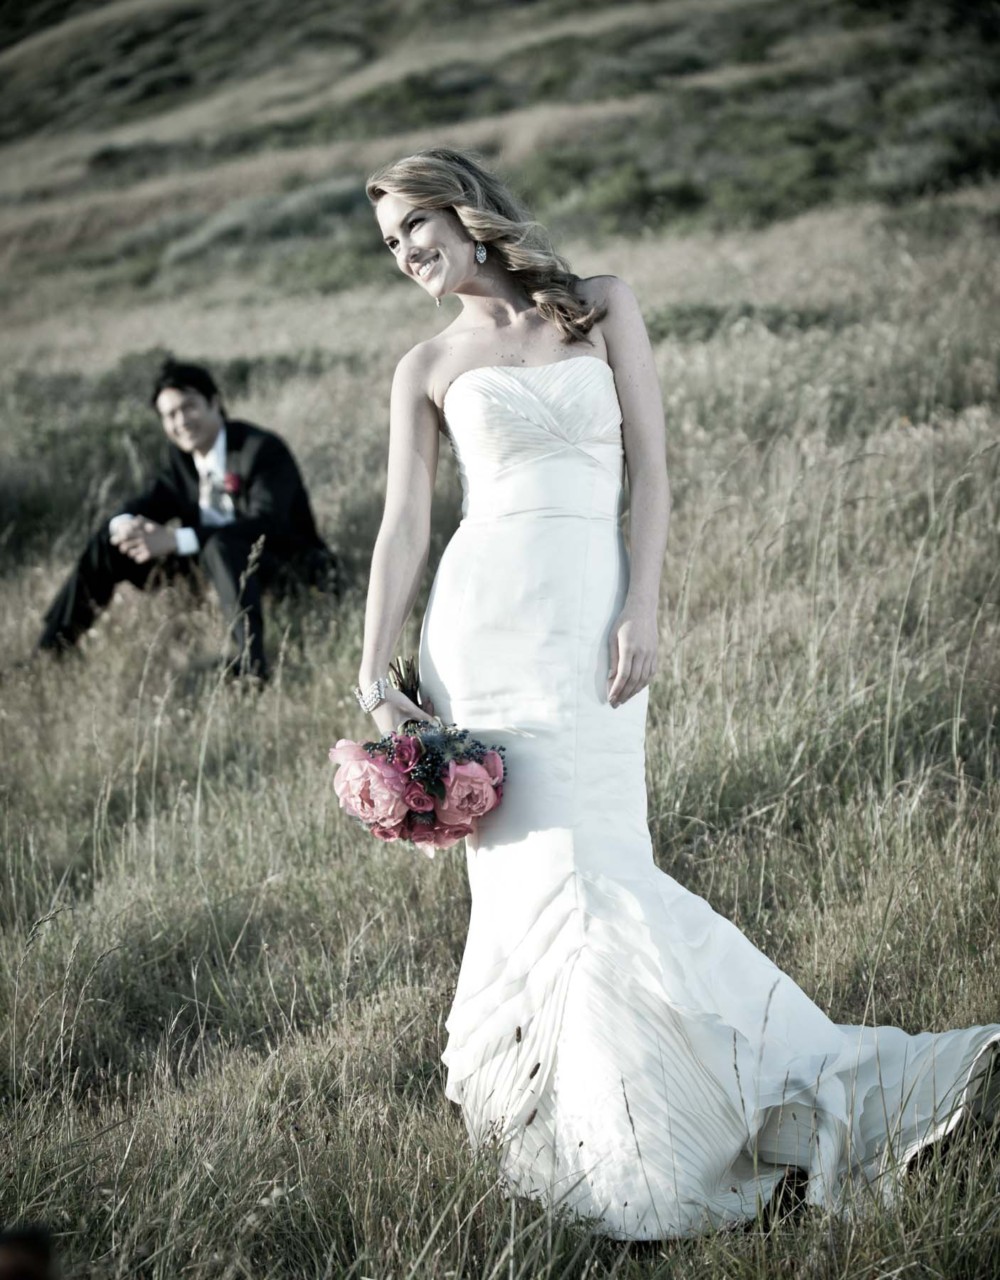 Looking for a professional wedding photographer in ?